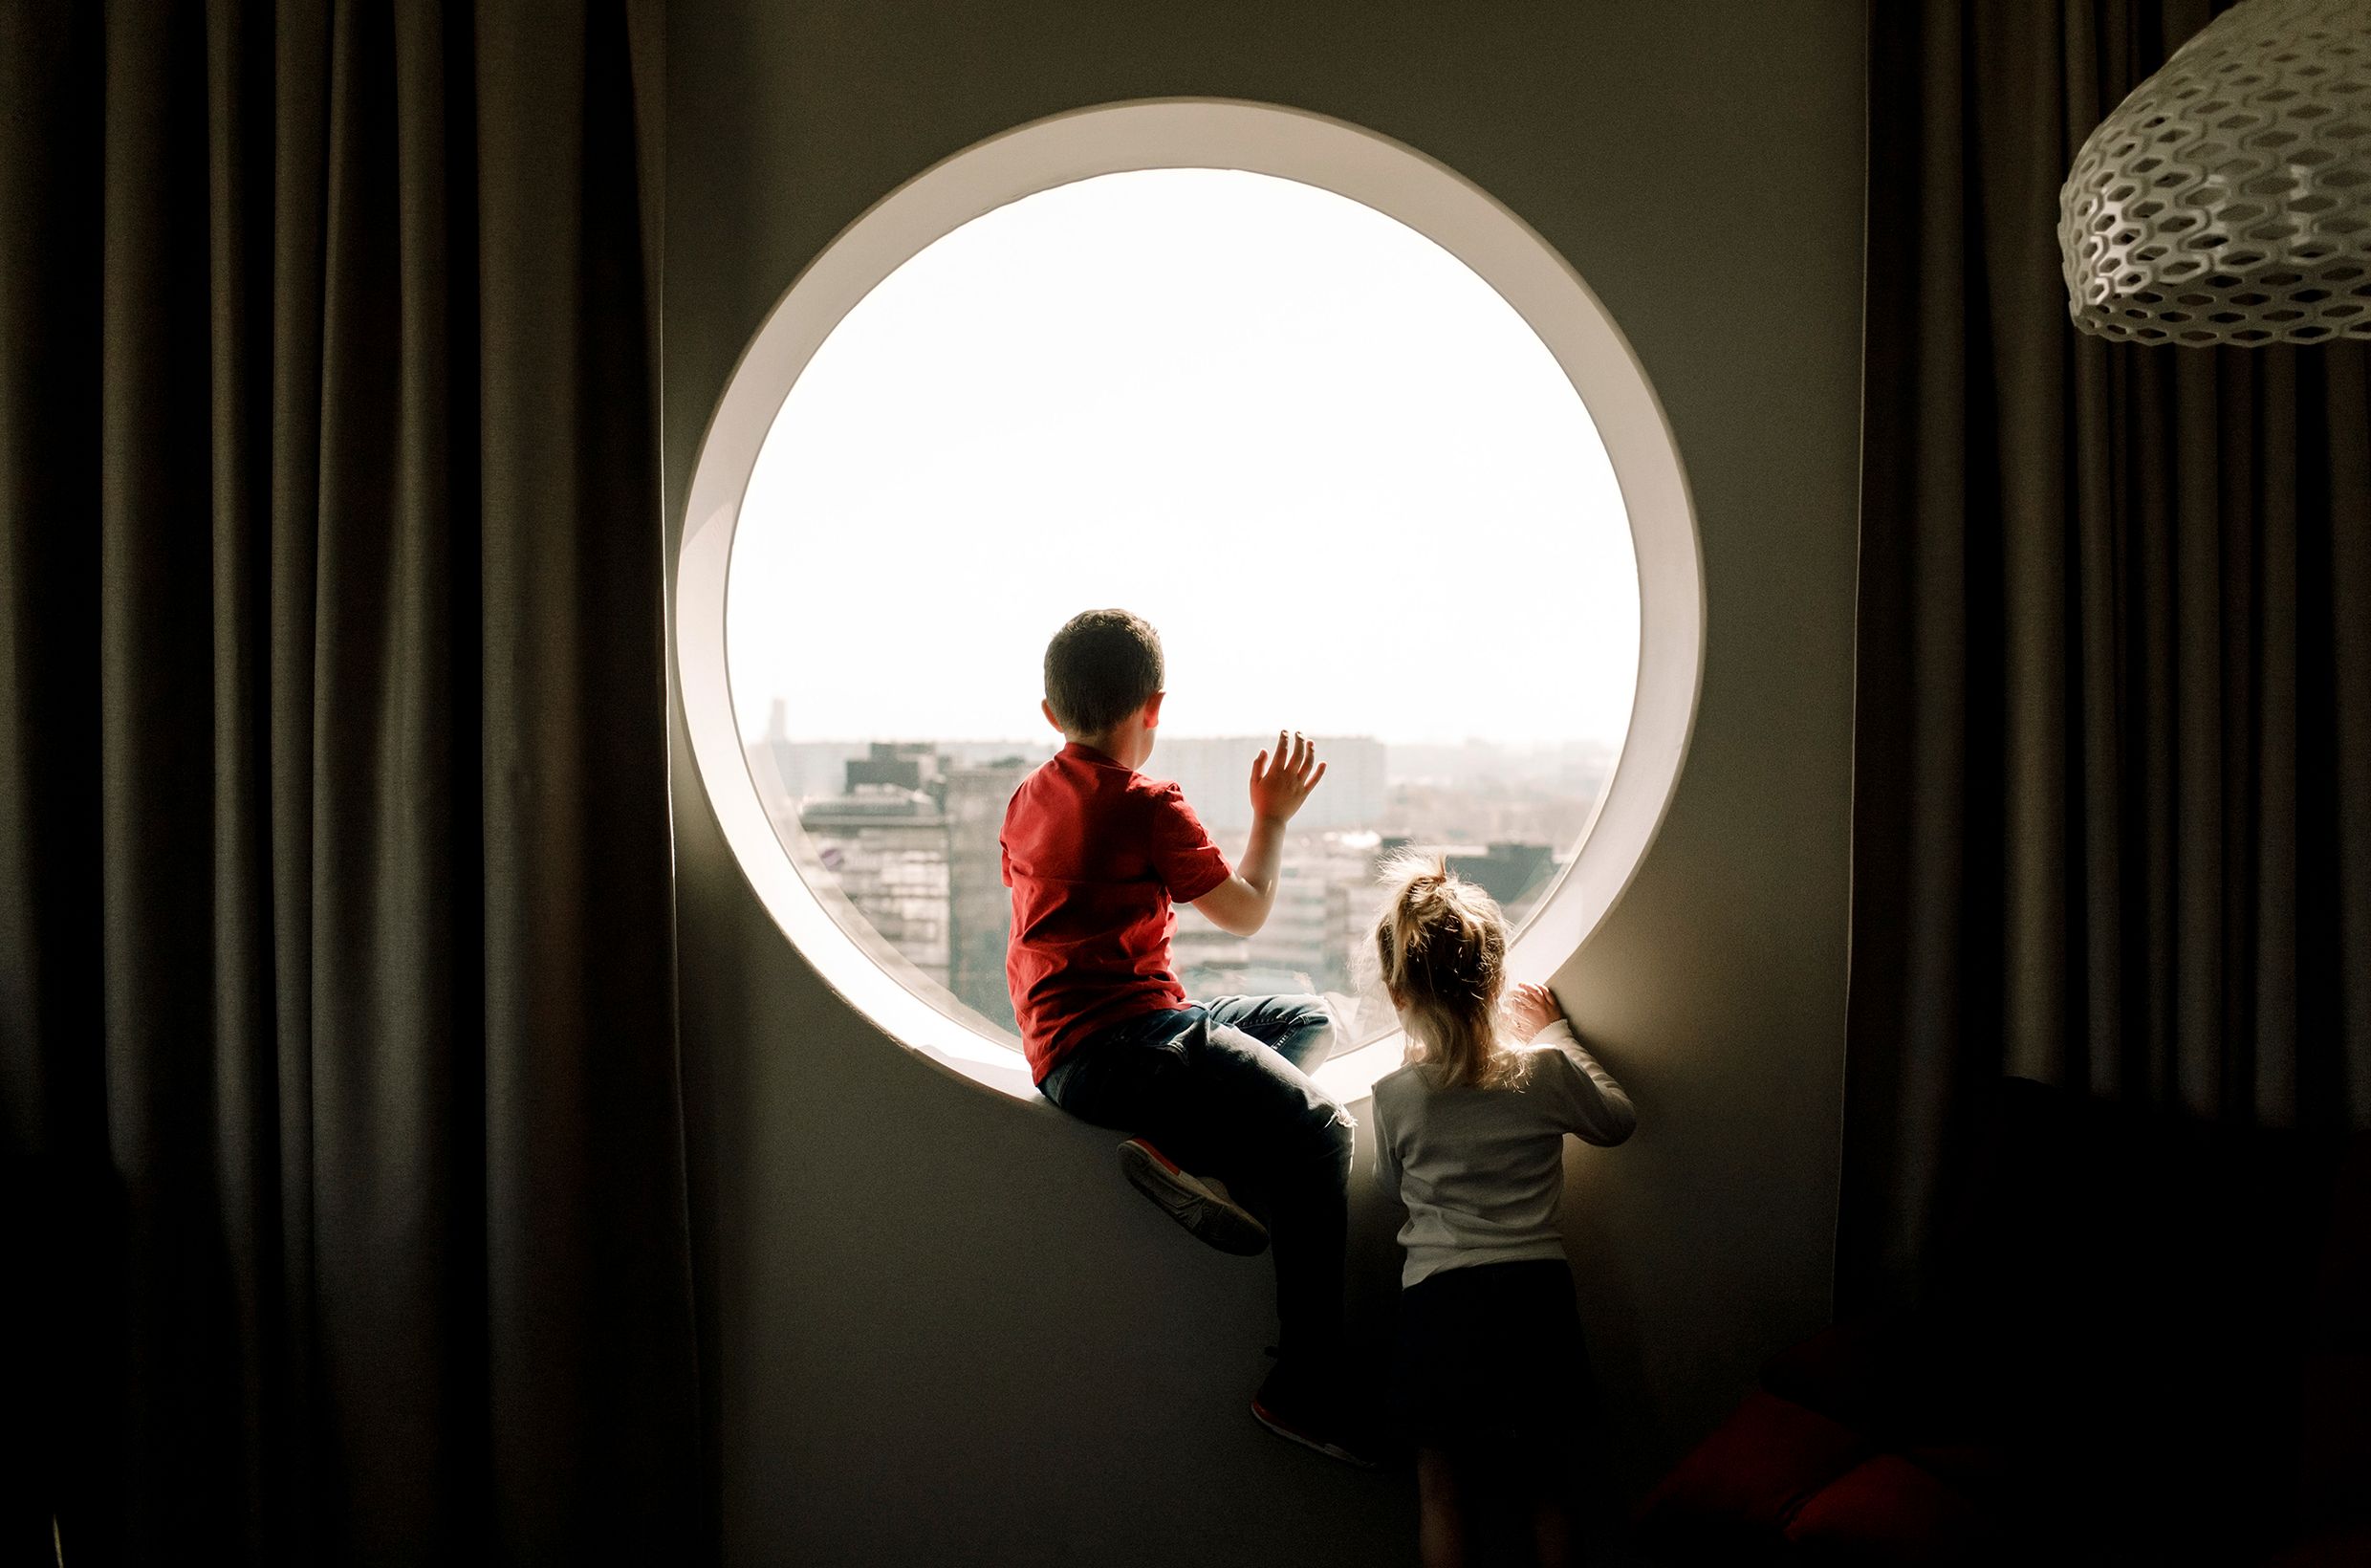 A wide, round window. A person is sitting backlit in the window sill, looking out. A child is standing on the side, also looking out.